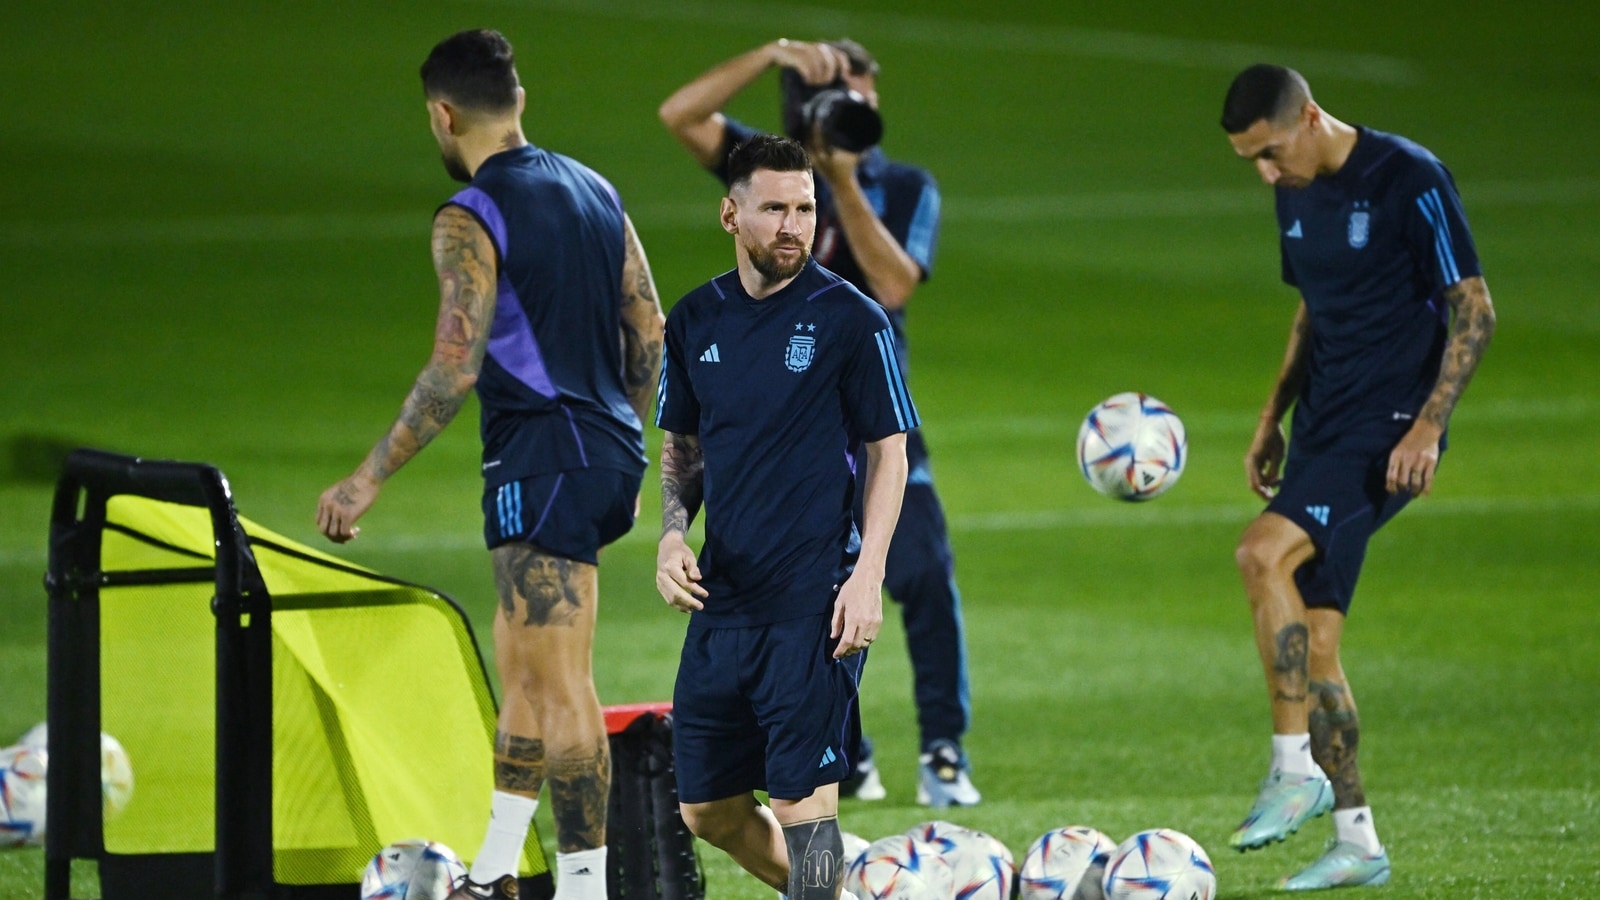 Argentina vs Netherlands Football Live Streaming FIFA World Cup 2022 Quarterfinal Match Today: When and Where to watch